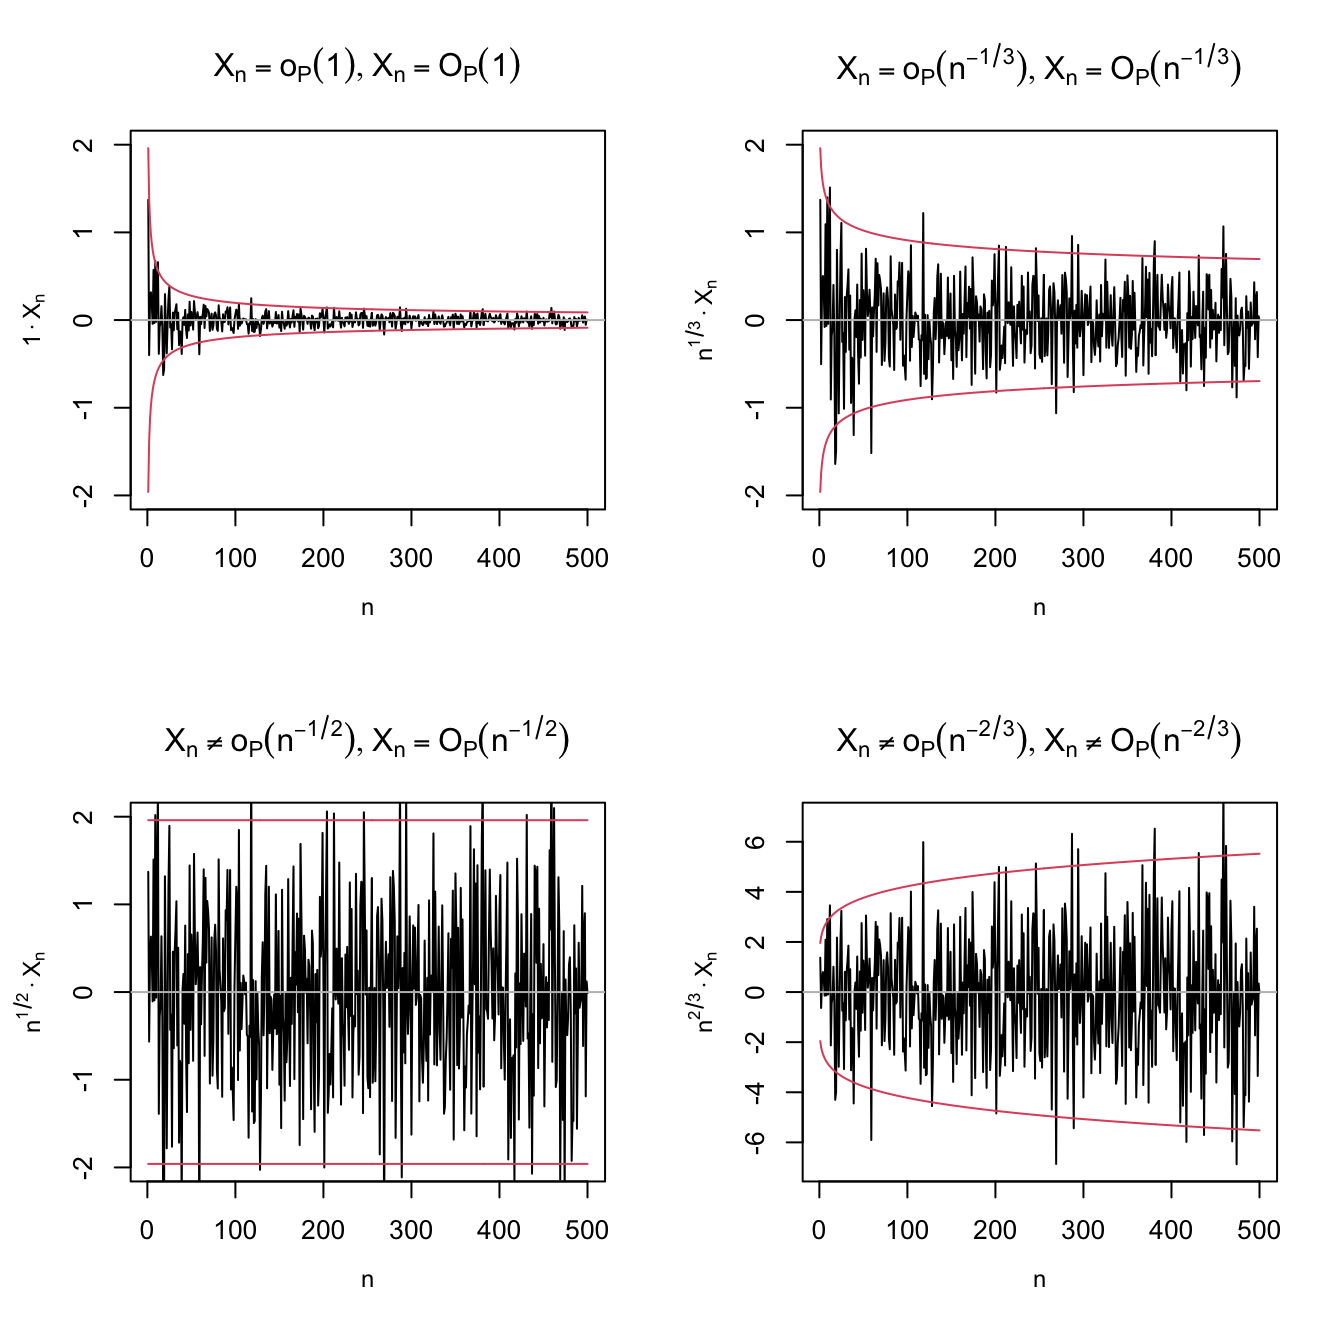 Differences and similarities between little-\(o_\mathbb{P}\) and big-\(O_\mathbb{P},\) illustrated for the sequence of random variables \(X_n\stackrel{d}{=}\mathcal{N}(0,1/n).\) Since \(X_n\stackrel{\mathbb{P}}{\longrightarrow}0,\) \(X_n=o_\mathbb{P}(1),\) as evidenced in the upper left plot. The next plots check if \(X_n=o_\mathbb{P}(a_n)\) by evaluating if \(X_n/a_n\stackrel{\mathbb{P}}{\longrightarrow}0,\) for \(a_n=n^{-1/3},n^{-1/2},n^{-2/3}.\) Clearly, \(X_n=o_\mathbb{P}(n^{-1/3})\) (\(n^{1/3}X_n\stackrel{\mathbb{P}}{\longrightarrow}0\)) but \(X_n\neq o_\mathbb{P}(n^{-1/2})\) (\(n^{1/2}X_n\stackrel{\mathbb{P}}{\longrightarrow}\mathcal{N}(0,1)\)) and \(X_n\neq o_\mathbb{P}(n^{-2/3})\) (\(n^{2/3}X_n\) diverges). In the first three cases, \(X_n=O_\mathbb{P}(a_n);\) the fourth is \(X_n\neq O_\mathbb{P}(n^{-2/3}),\) \(n^{2/3}X_n\) is not bounded in probability. The red lines represent the \(95\%\) confidence intervals \(\left(-z_{0.025}/(a_n\sqrt{n}),z_{0.025}/(a_n\sqrt{n})\right)\) of the random variable \(X_n/a_n,\) and help evaluating graphically the convergence in probability towards zero.